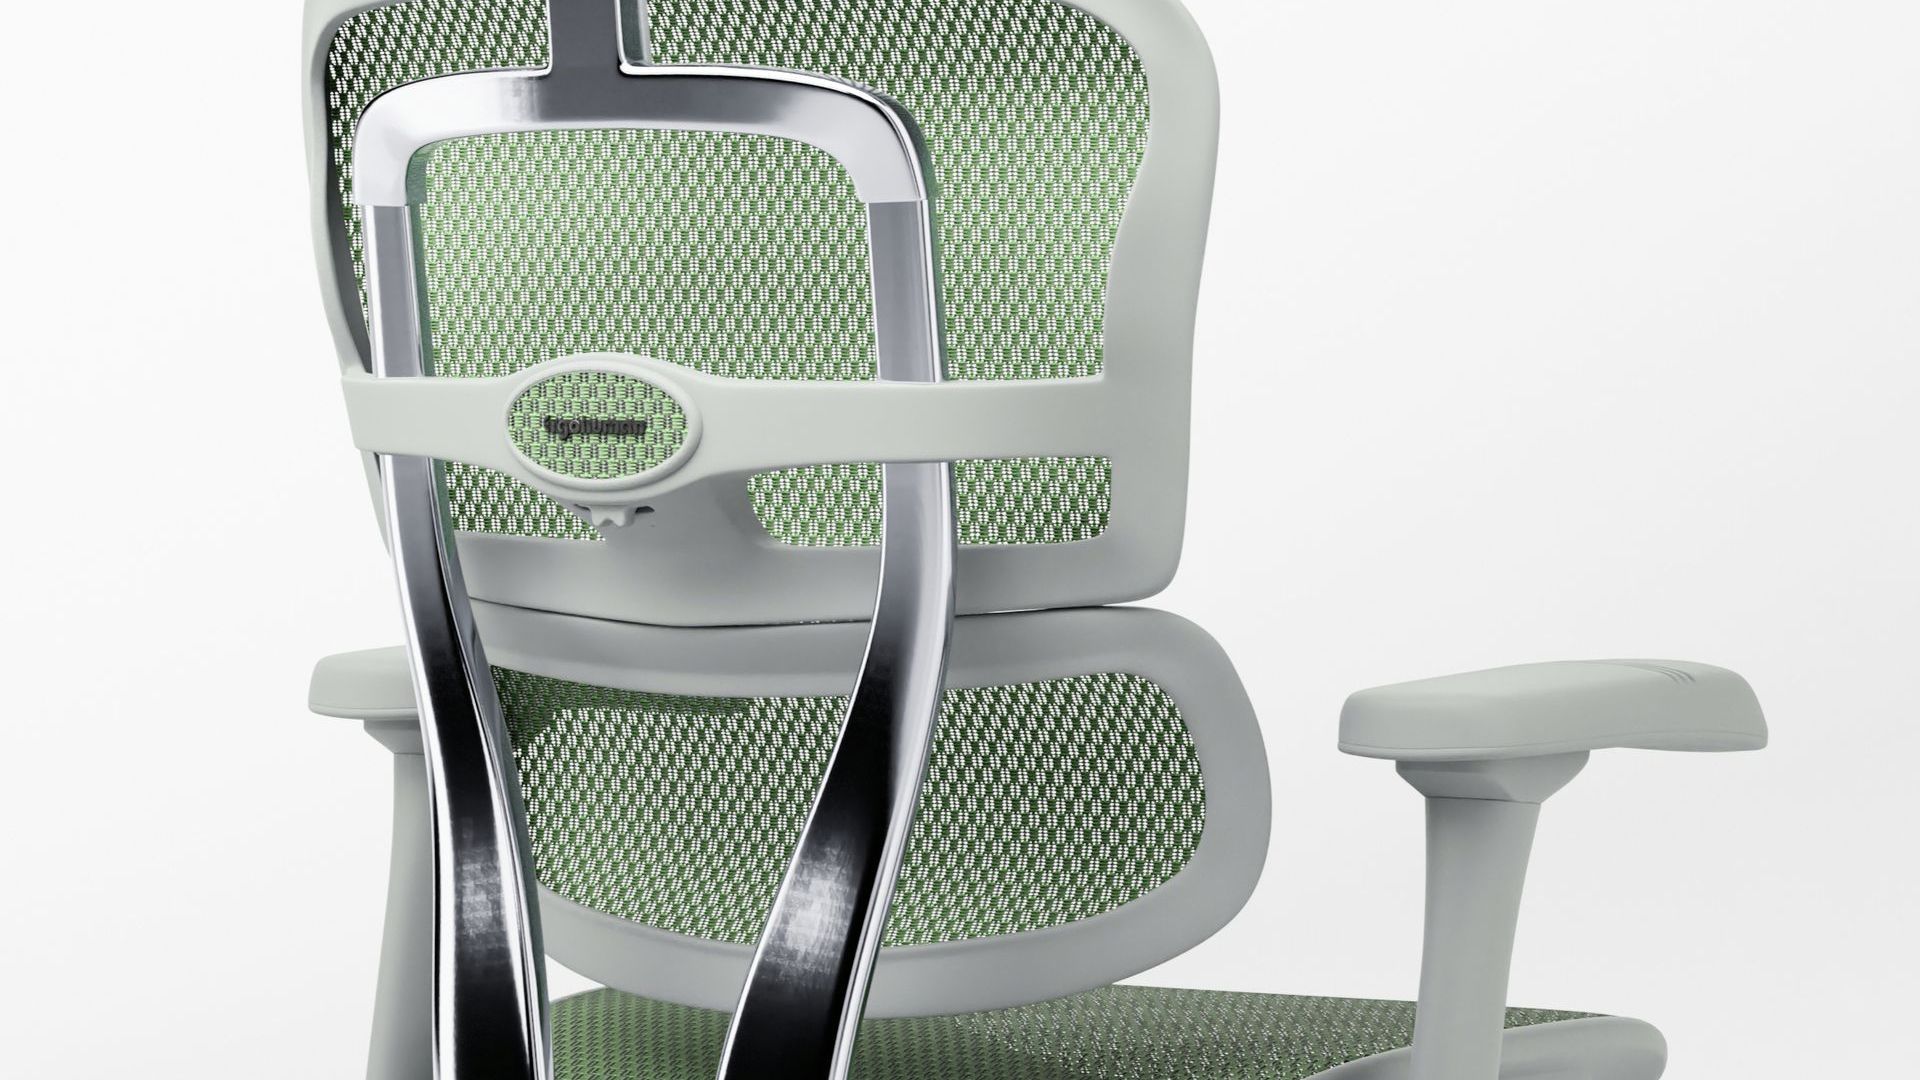 Close up view of the back of the Ergohuman Elite office chair in grey frame with green mesh 